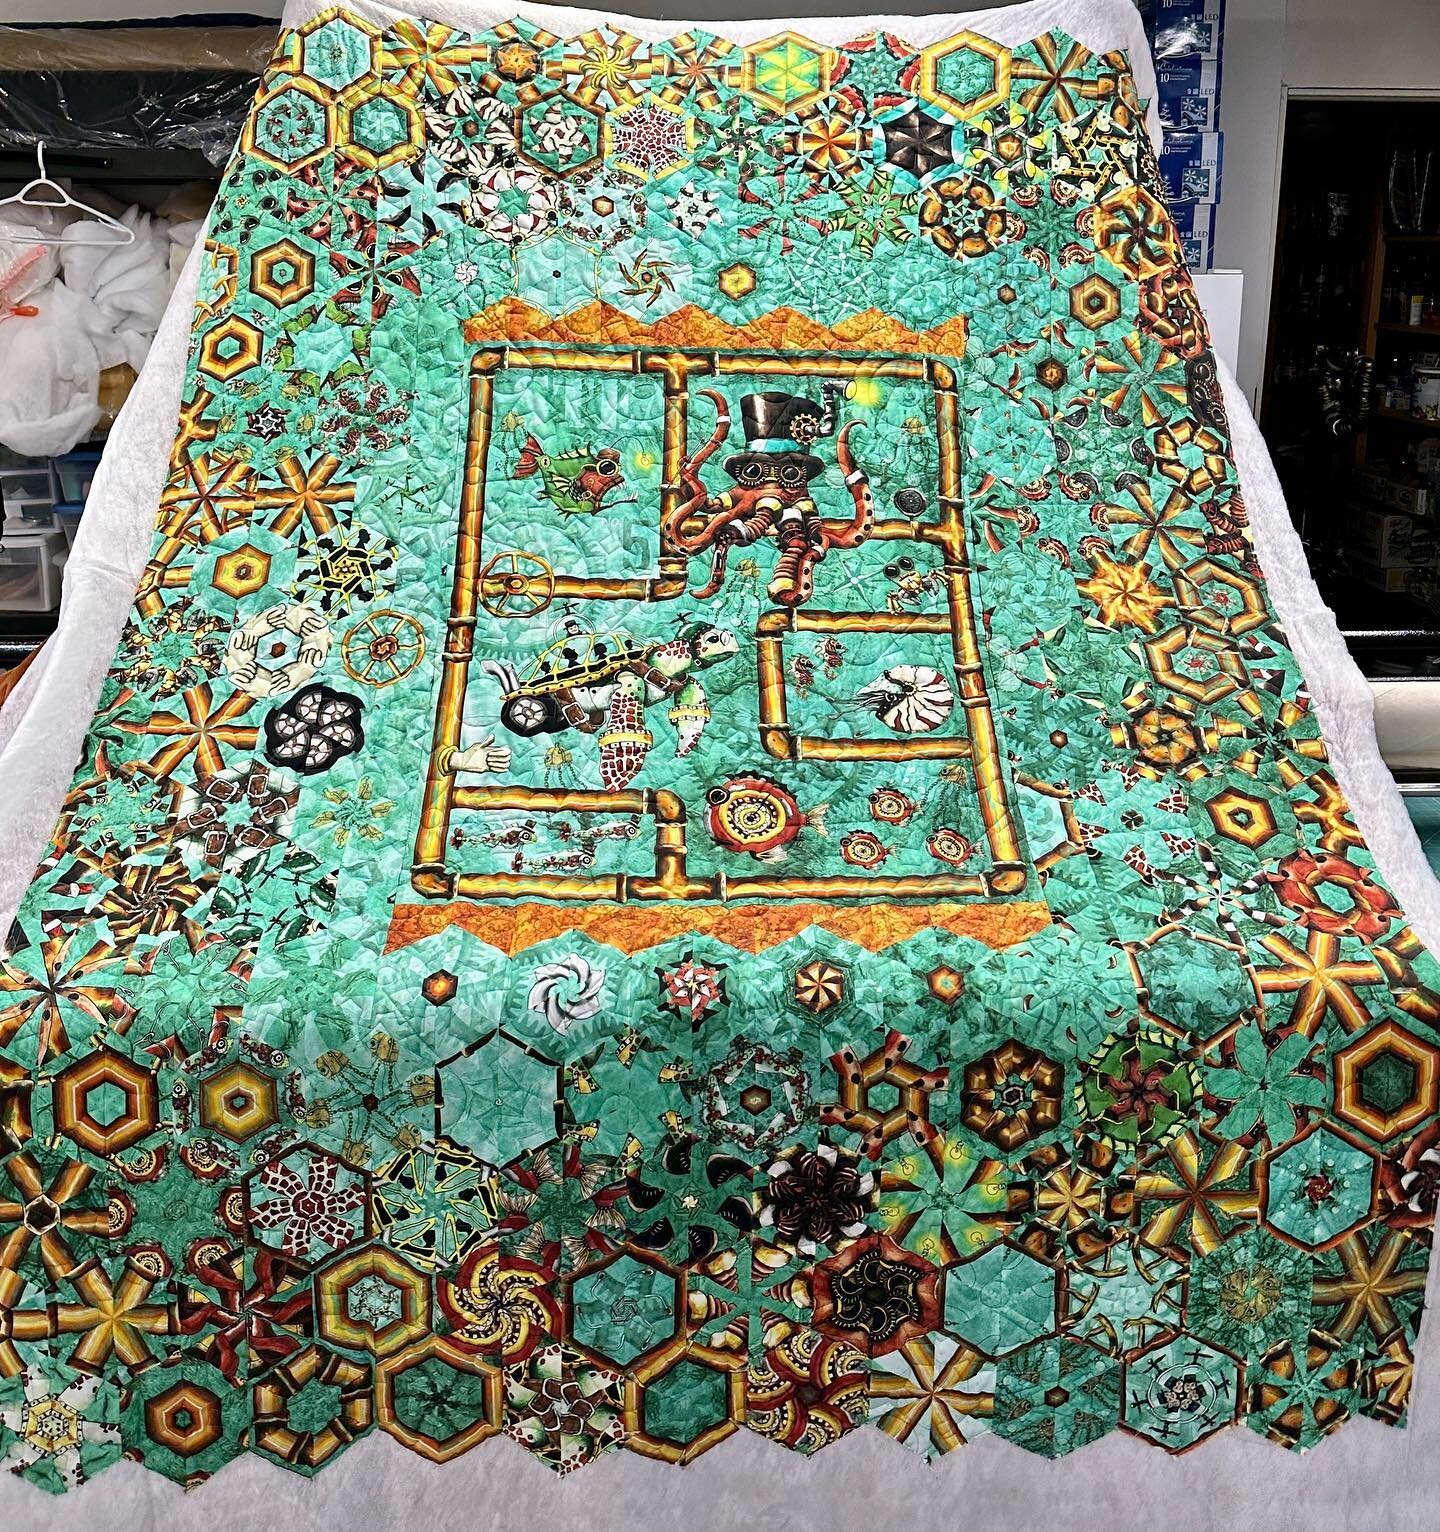 This Steampunk One Block Wonder was quilted by @cindygaleolson who who did an incredible job❣️ of course I had to quilt it in cogs👍🏼😍 #quiltsofinstagram #quiltingdaily #oneblockwonder #longarmquiltingservices #sisterchicksquilting